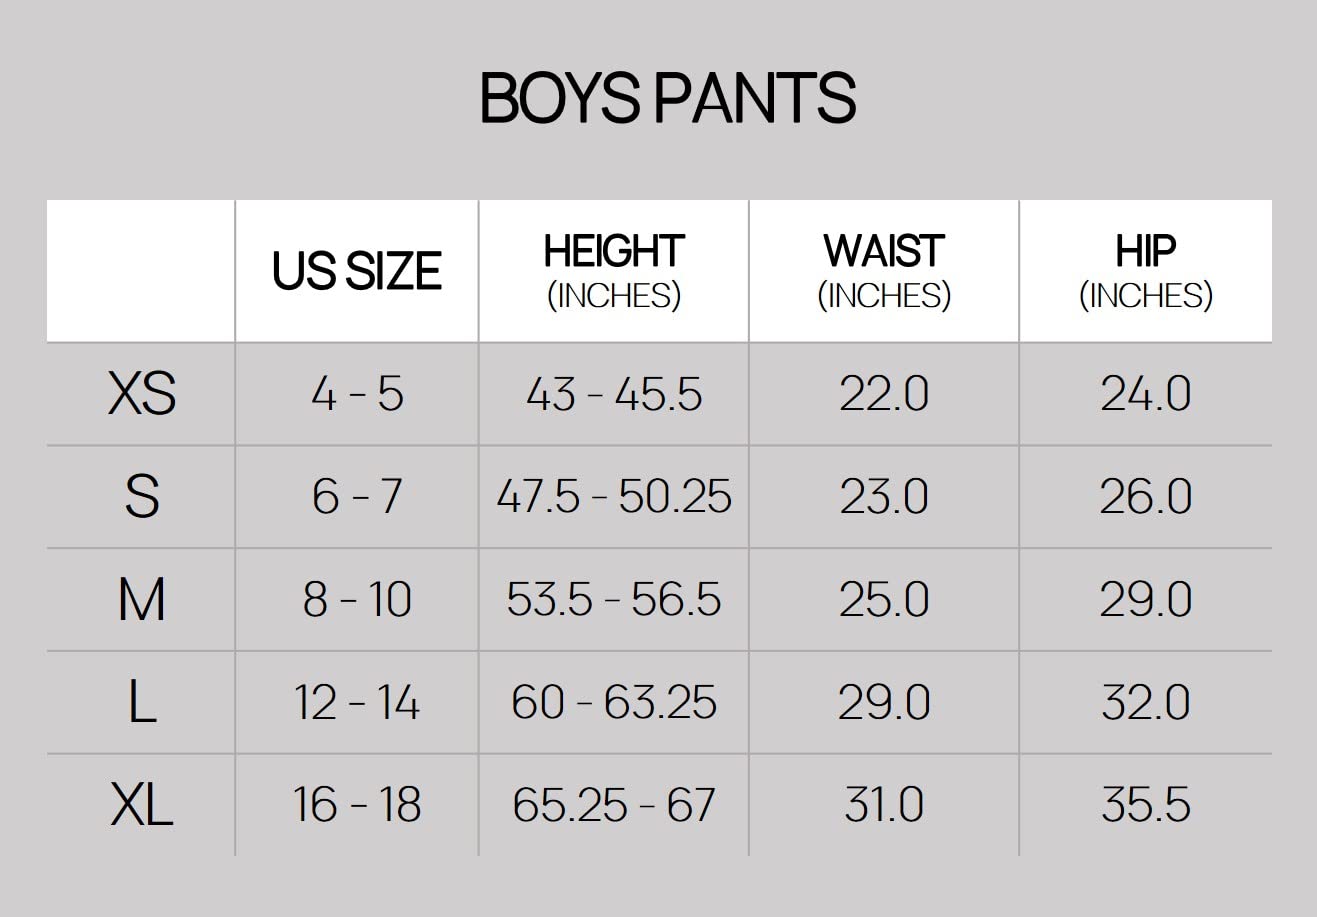 Real Essentials 3 Pack: Boys' Mesh Open Bottom Active Sweatpants with Pockets & Drawstring